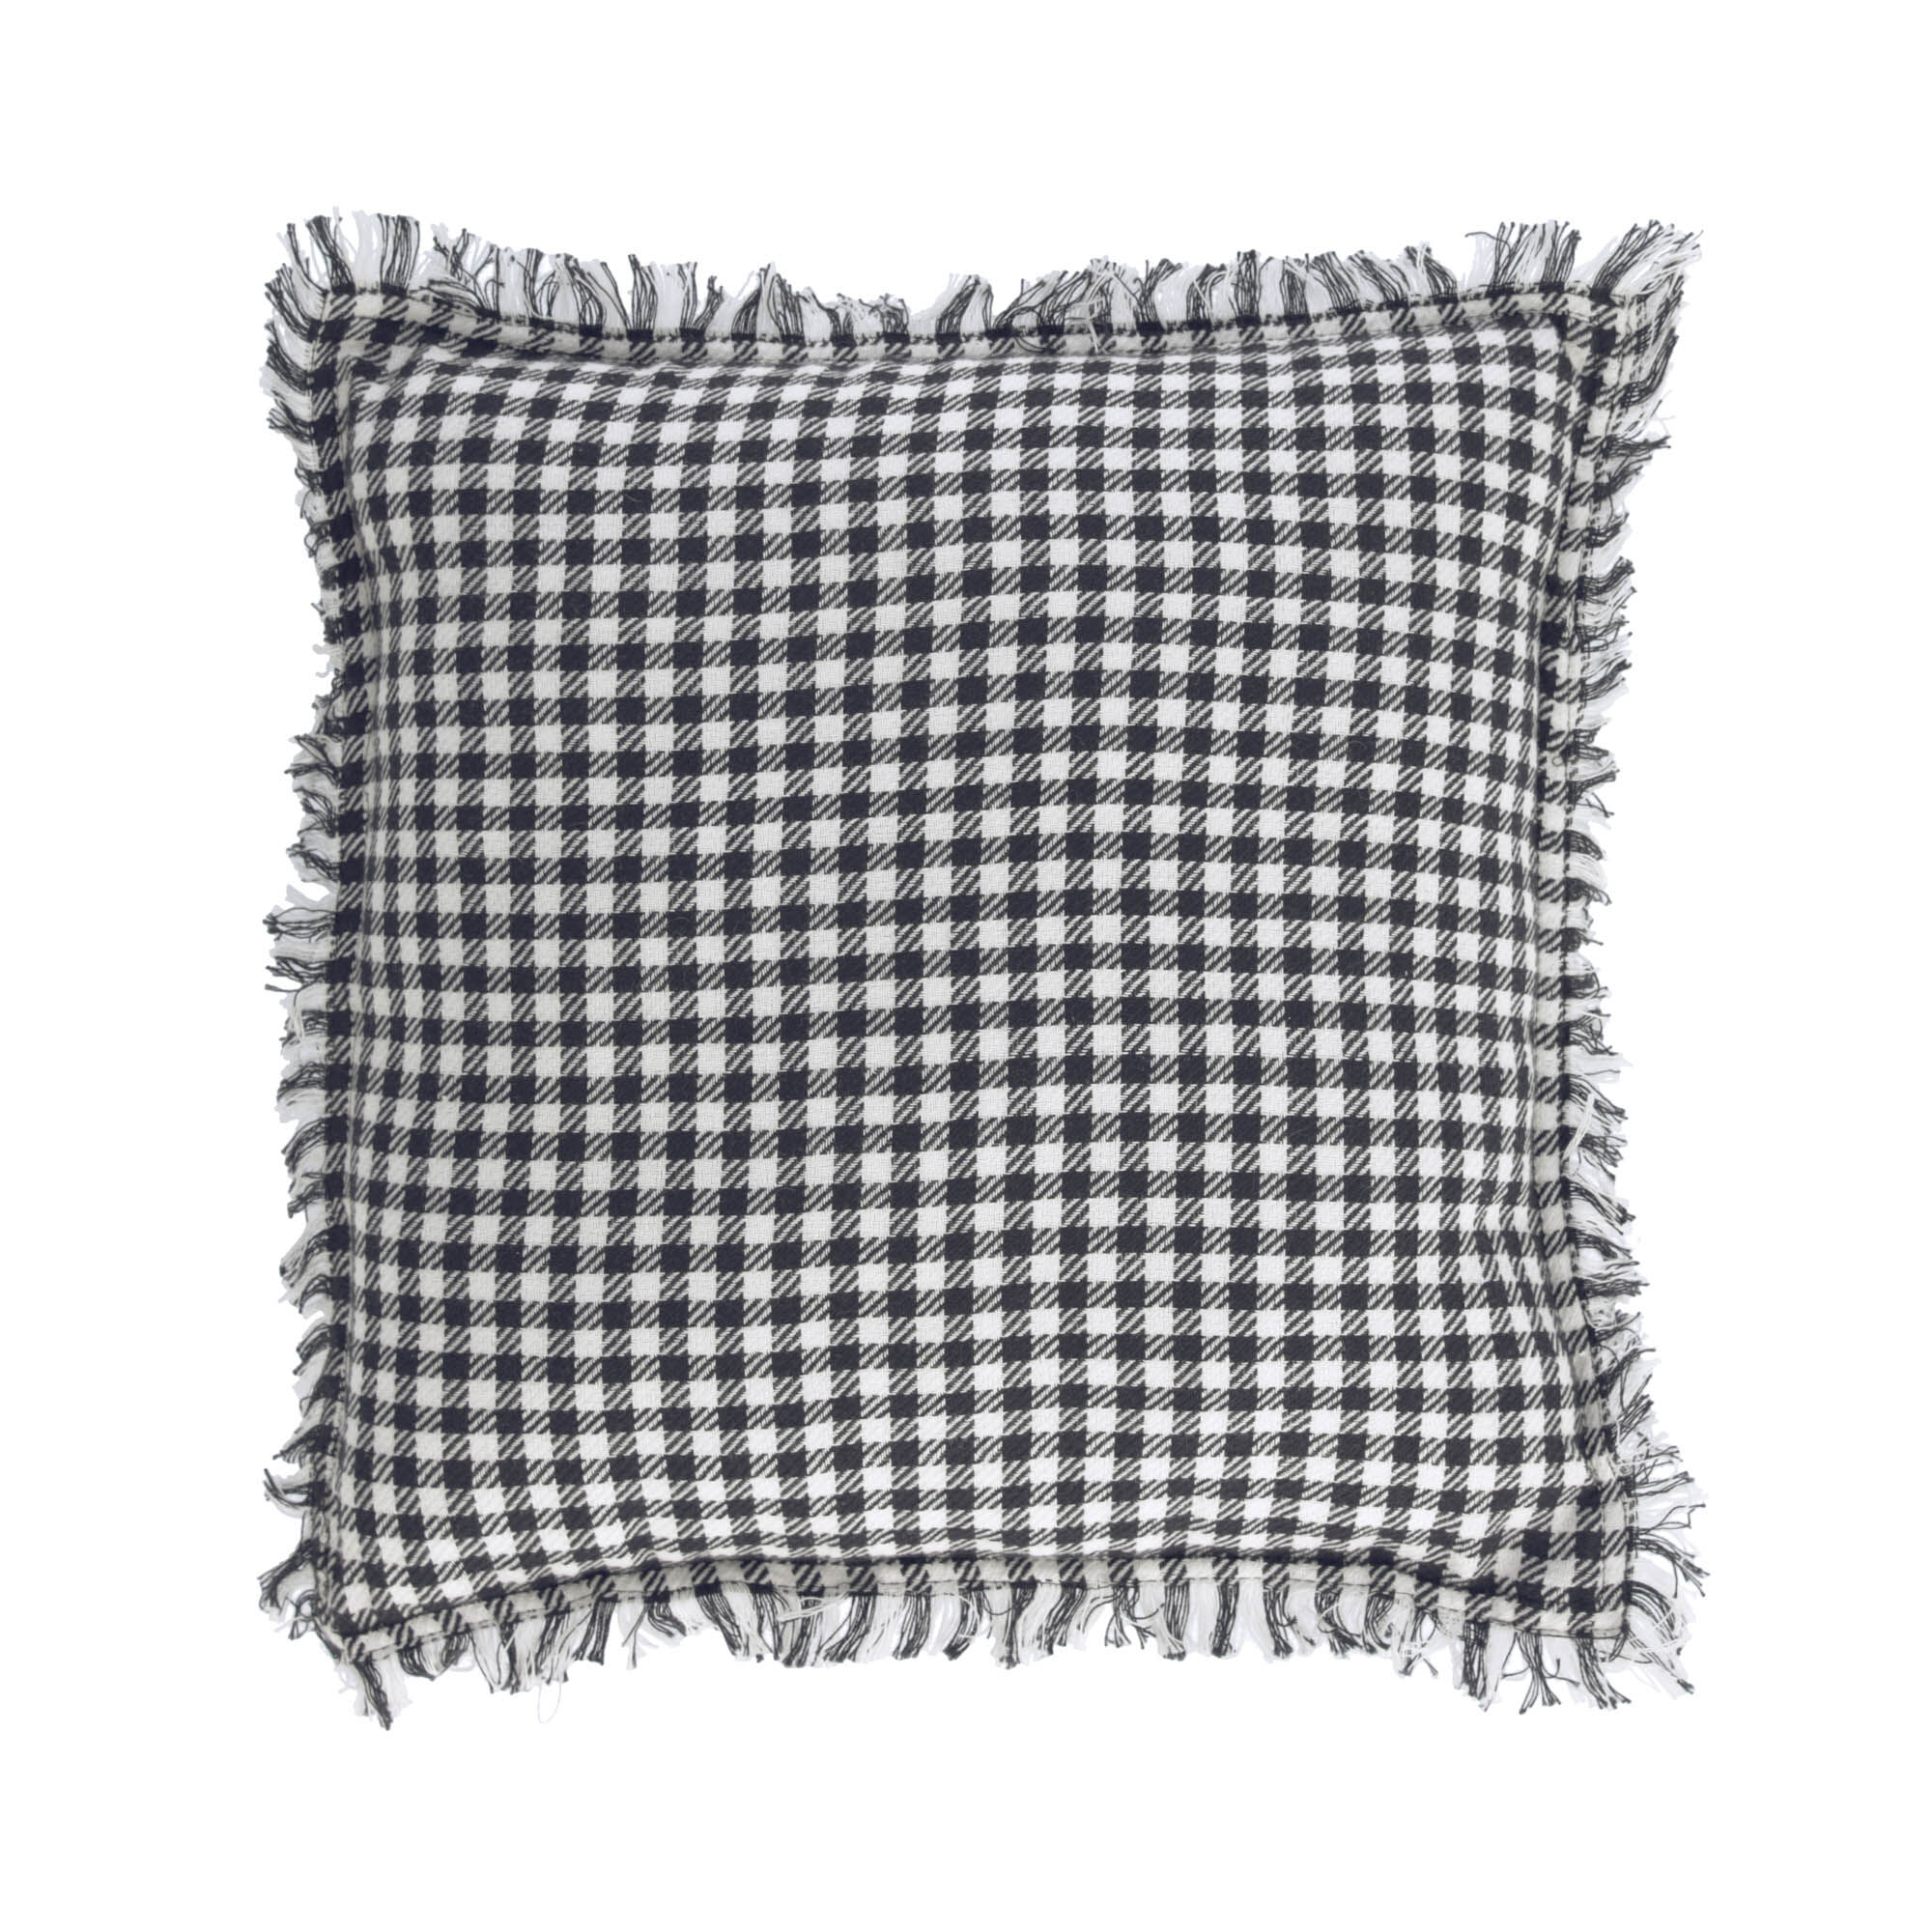 Kave Home Lindiwe 100% cotton cushion cover chequered 45 x 45 cm